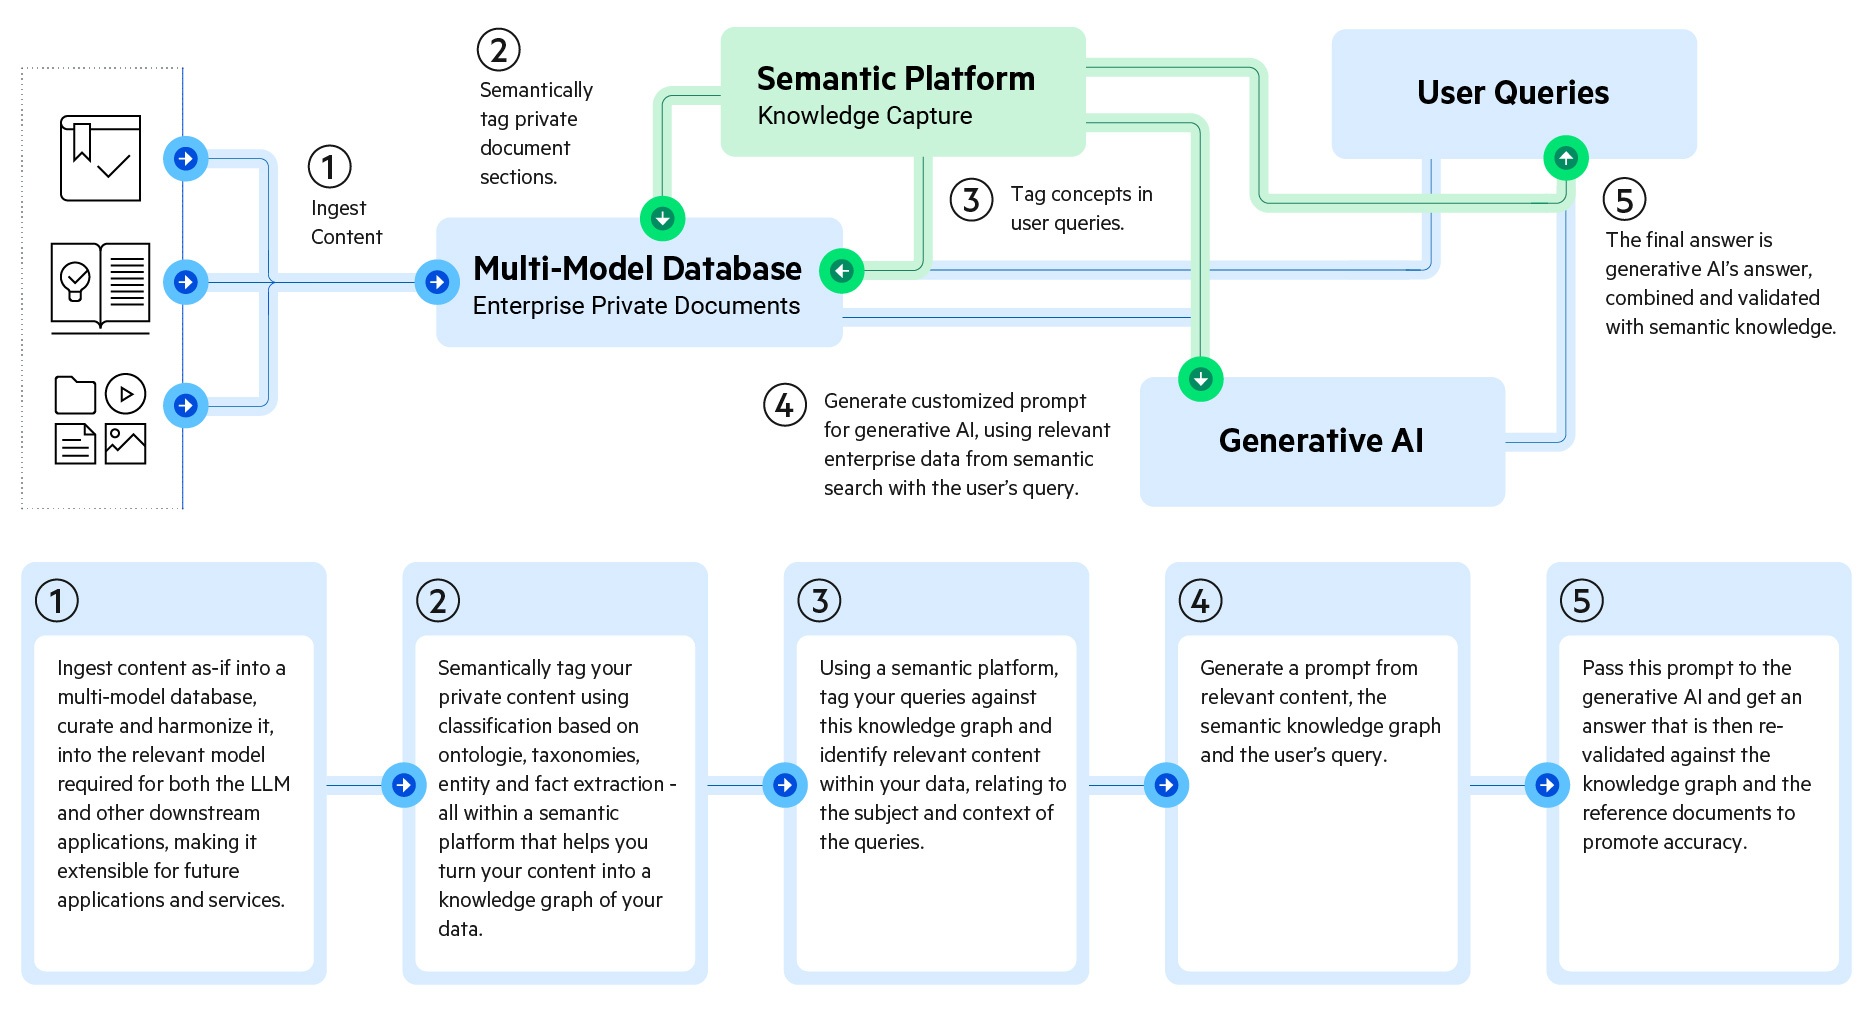 5-step process: step 1 ingest content, step 2 semantically tag private document sections, step 3 tag concepts in user queries, step 4 generate customized prompt for genAI, step 5 final answer is genAI's answer combined/validated with semantic knowledge